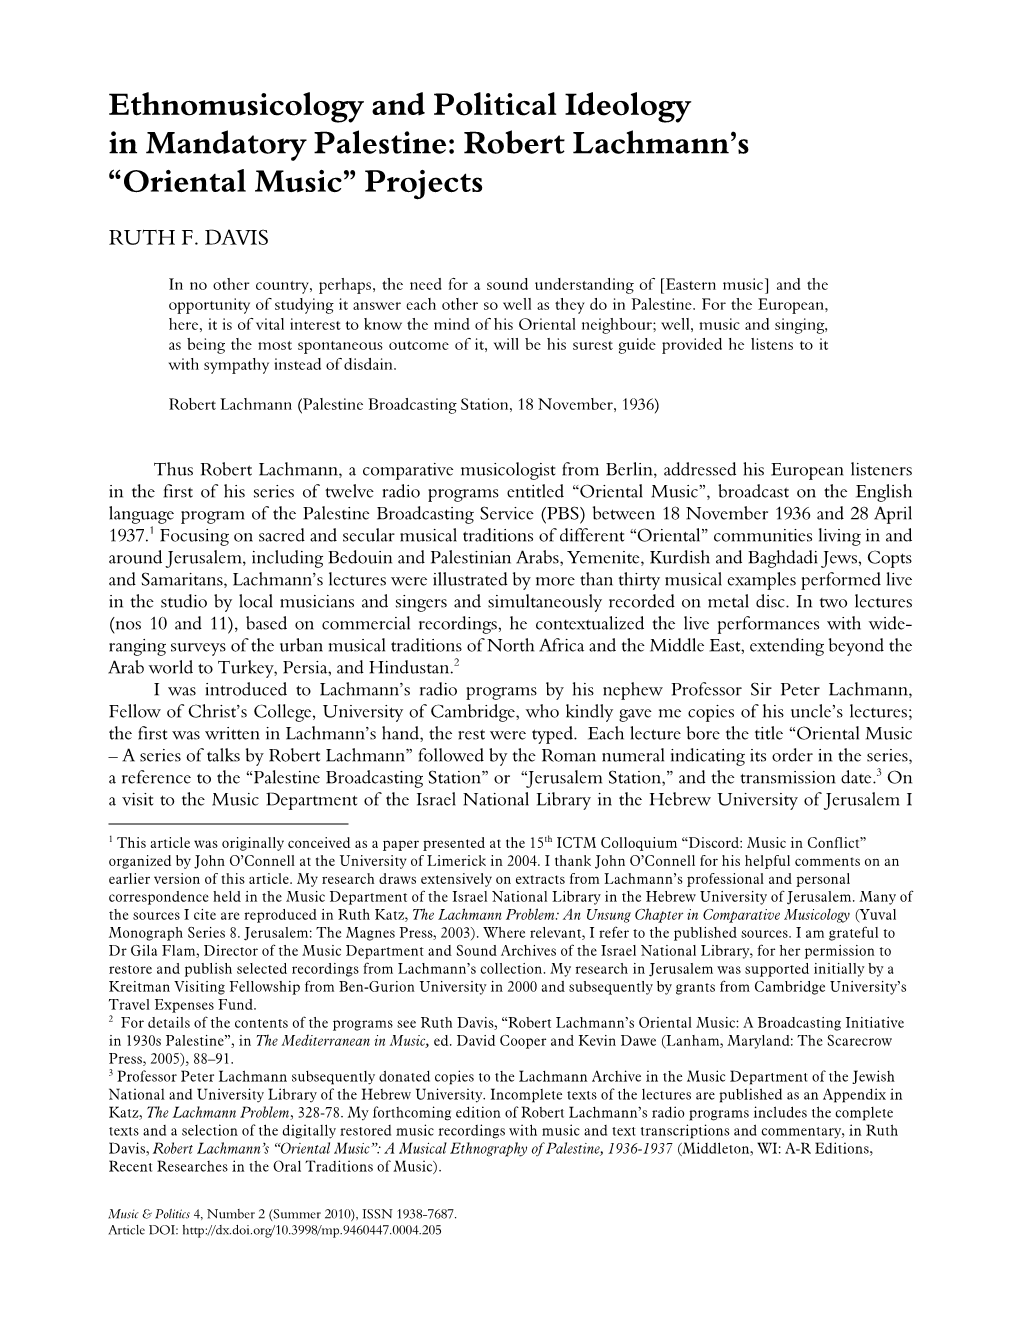 Ethnomusicology and Political Ideology in Mandatory Palestine: Robert Lachmann's “Oriental Music” Projects